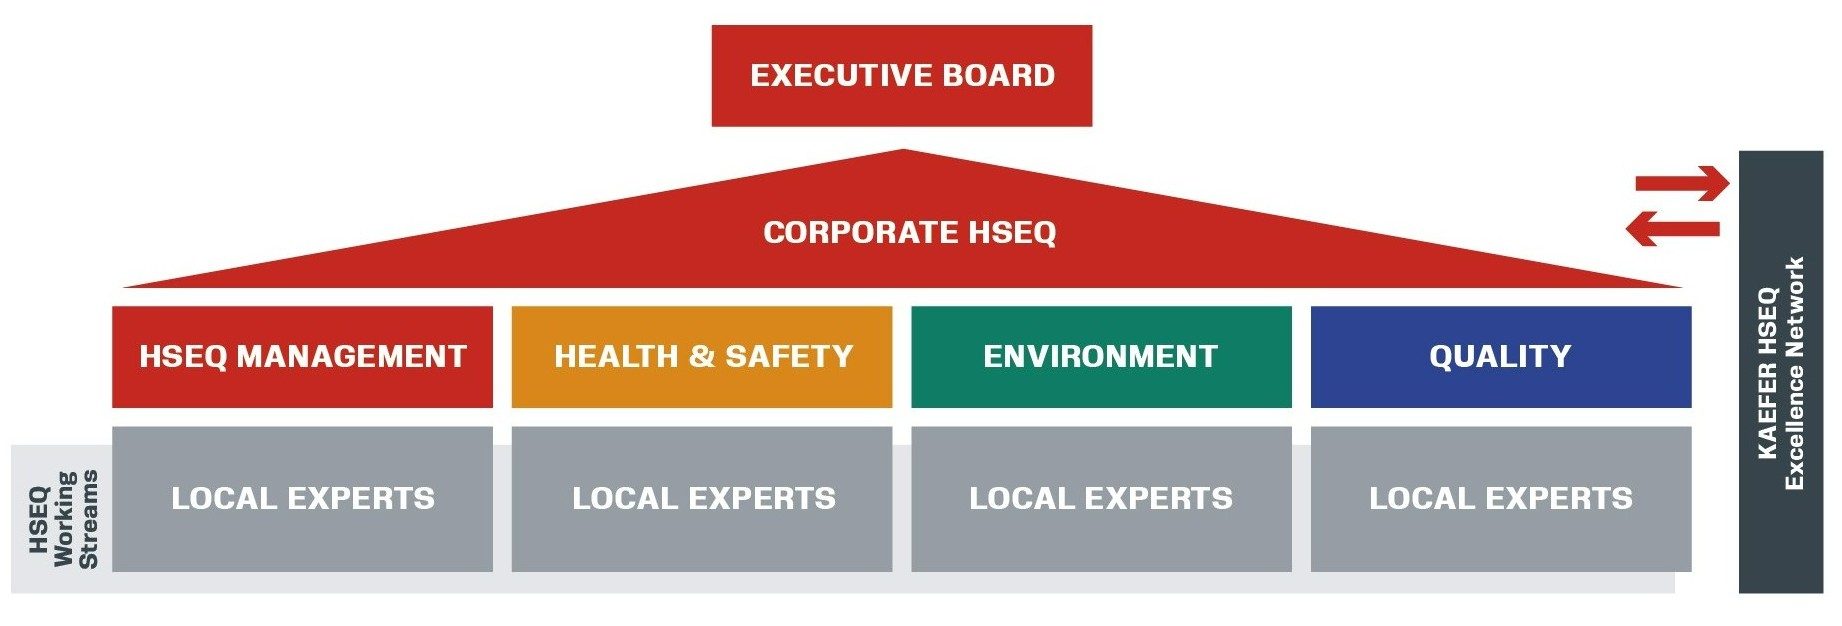 „The graphic illustrates that the KAEFER HSEQ Excellence Network is the backbone of the HSEQ work streams working together with the corporate HSEQ.“